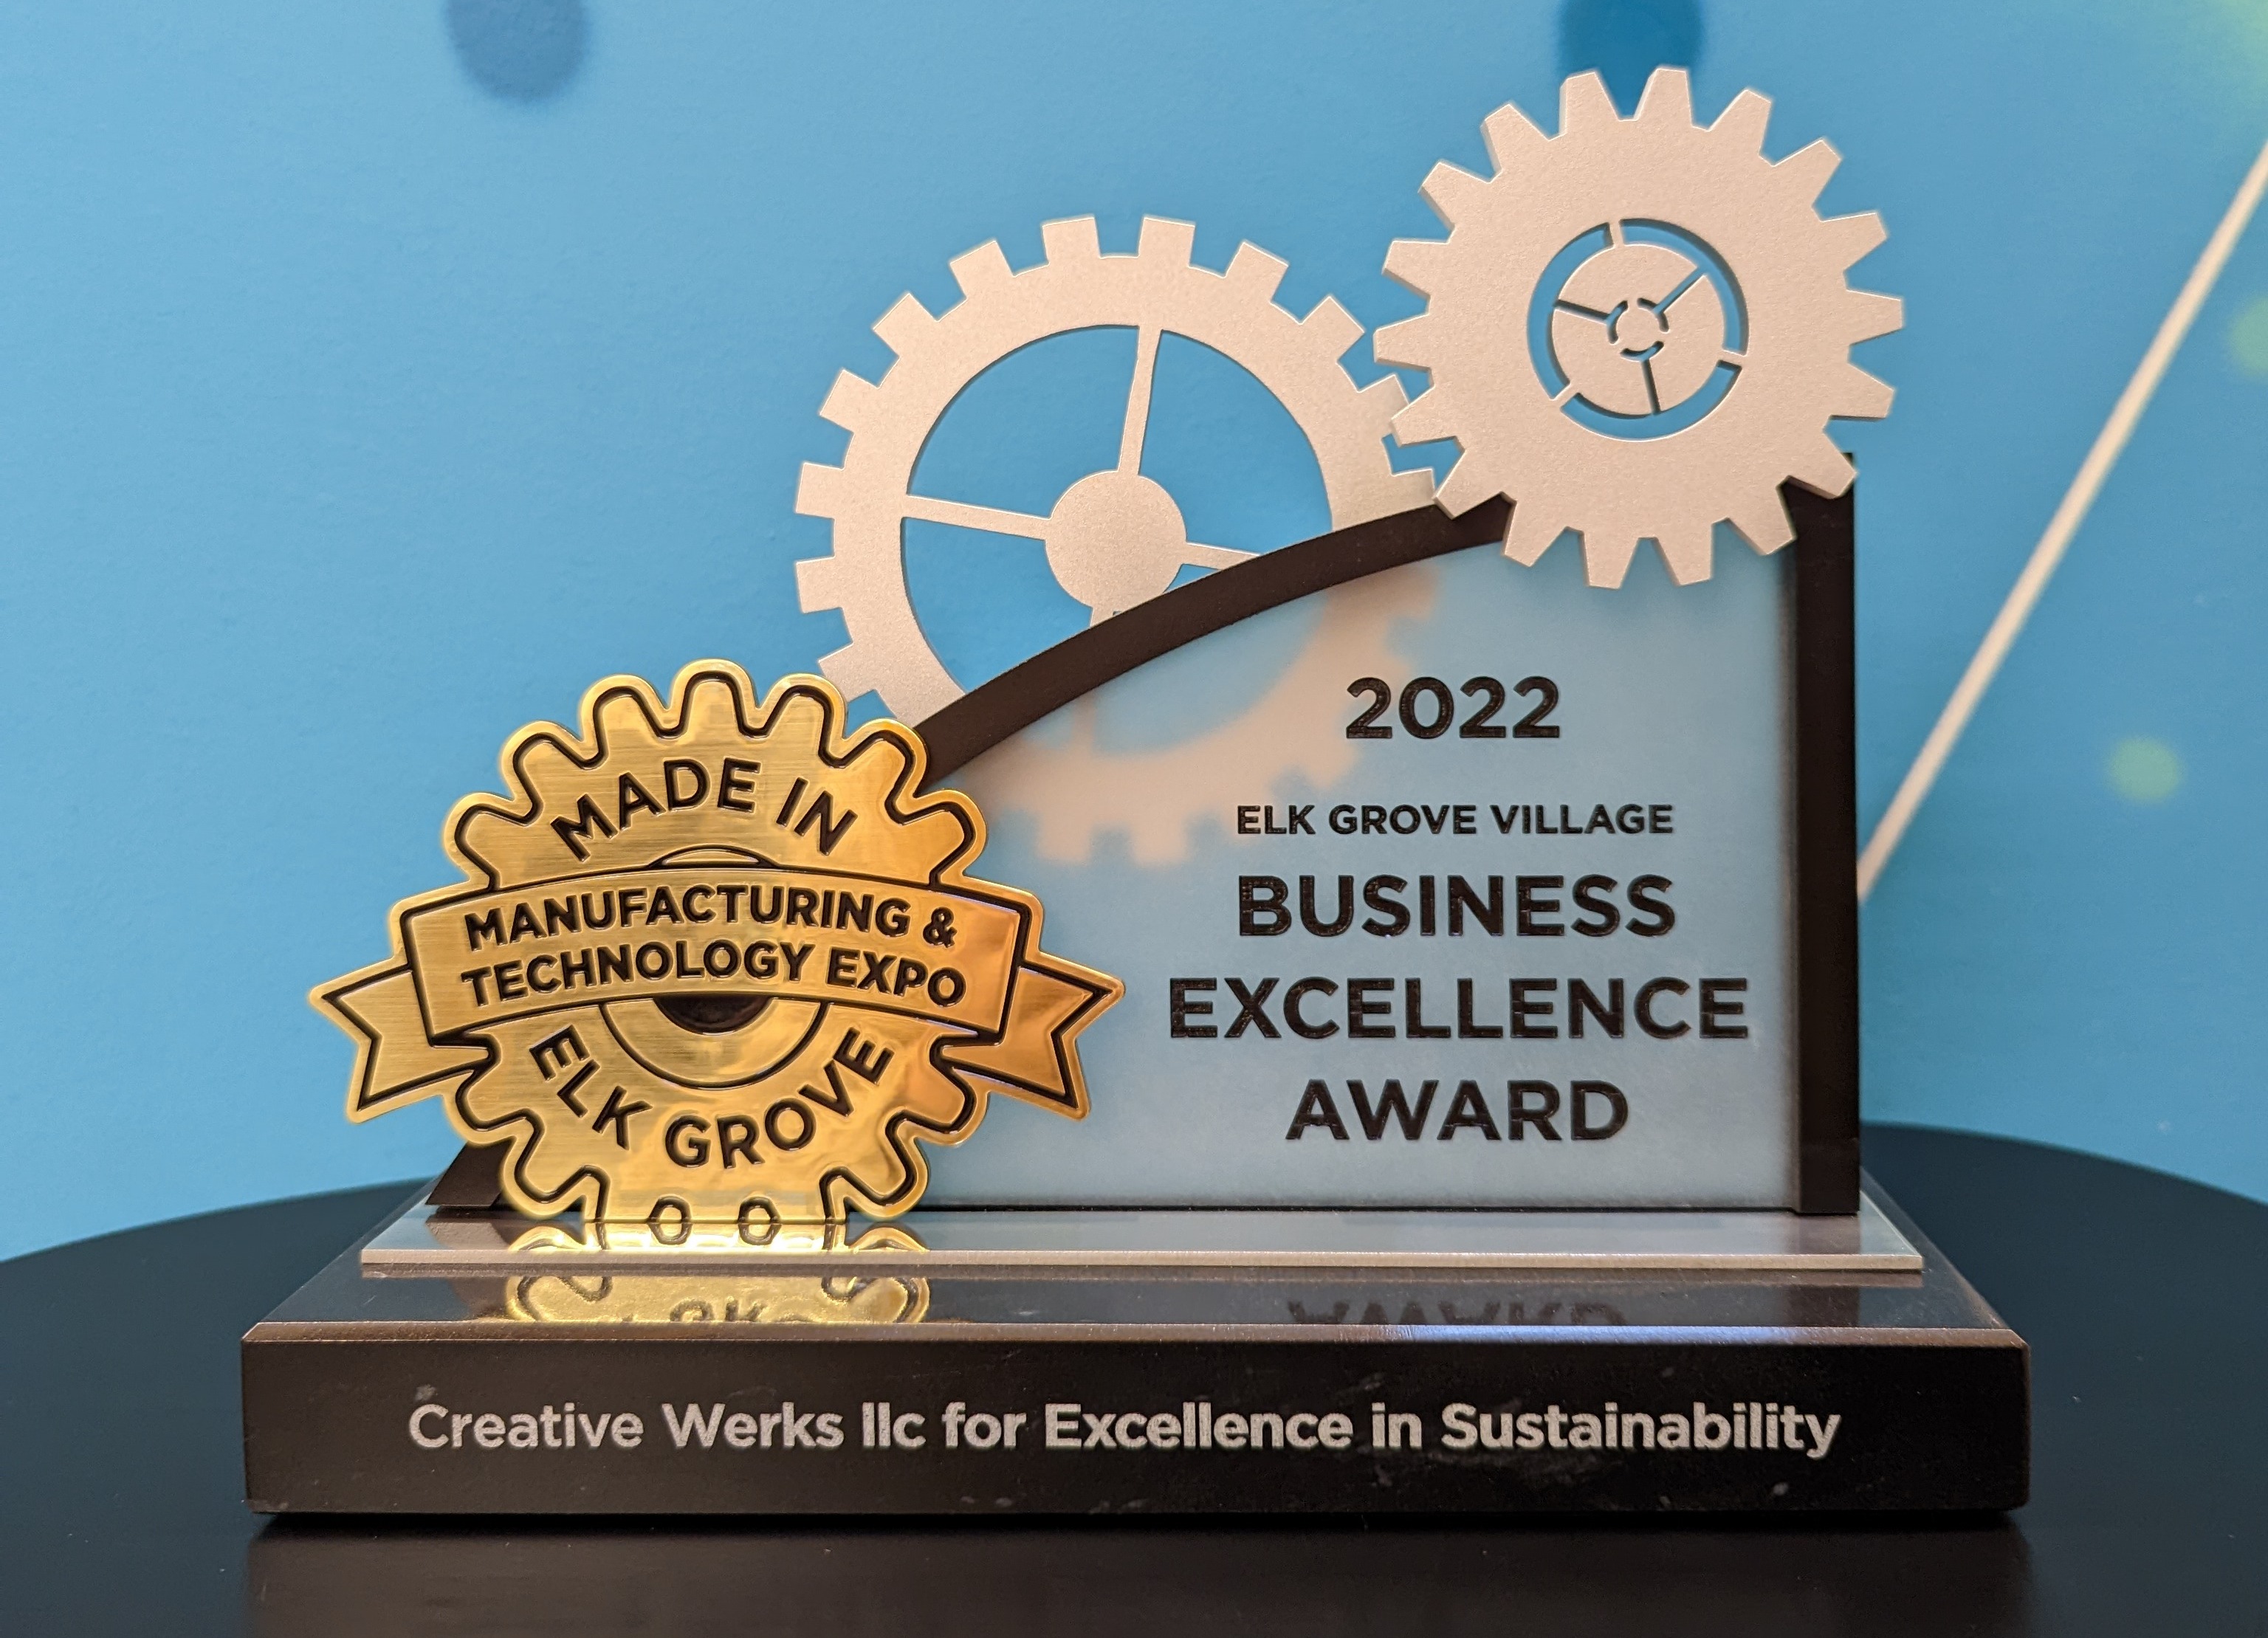 CW 2022 Business Excellence Award in Sustainability from Elk Grove Village